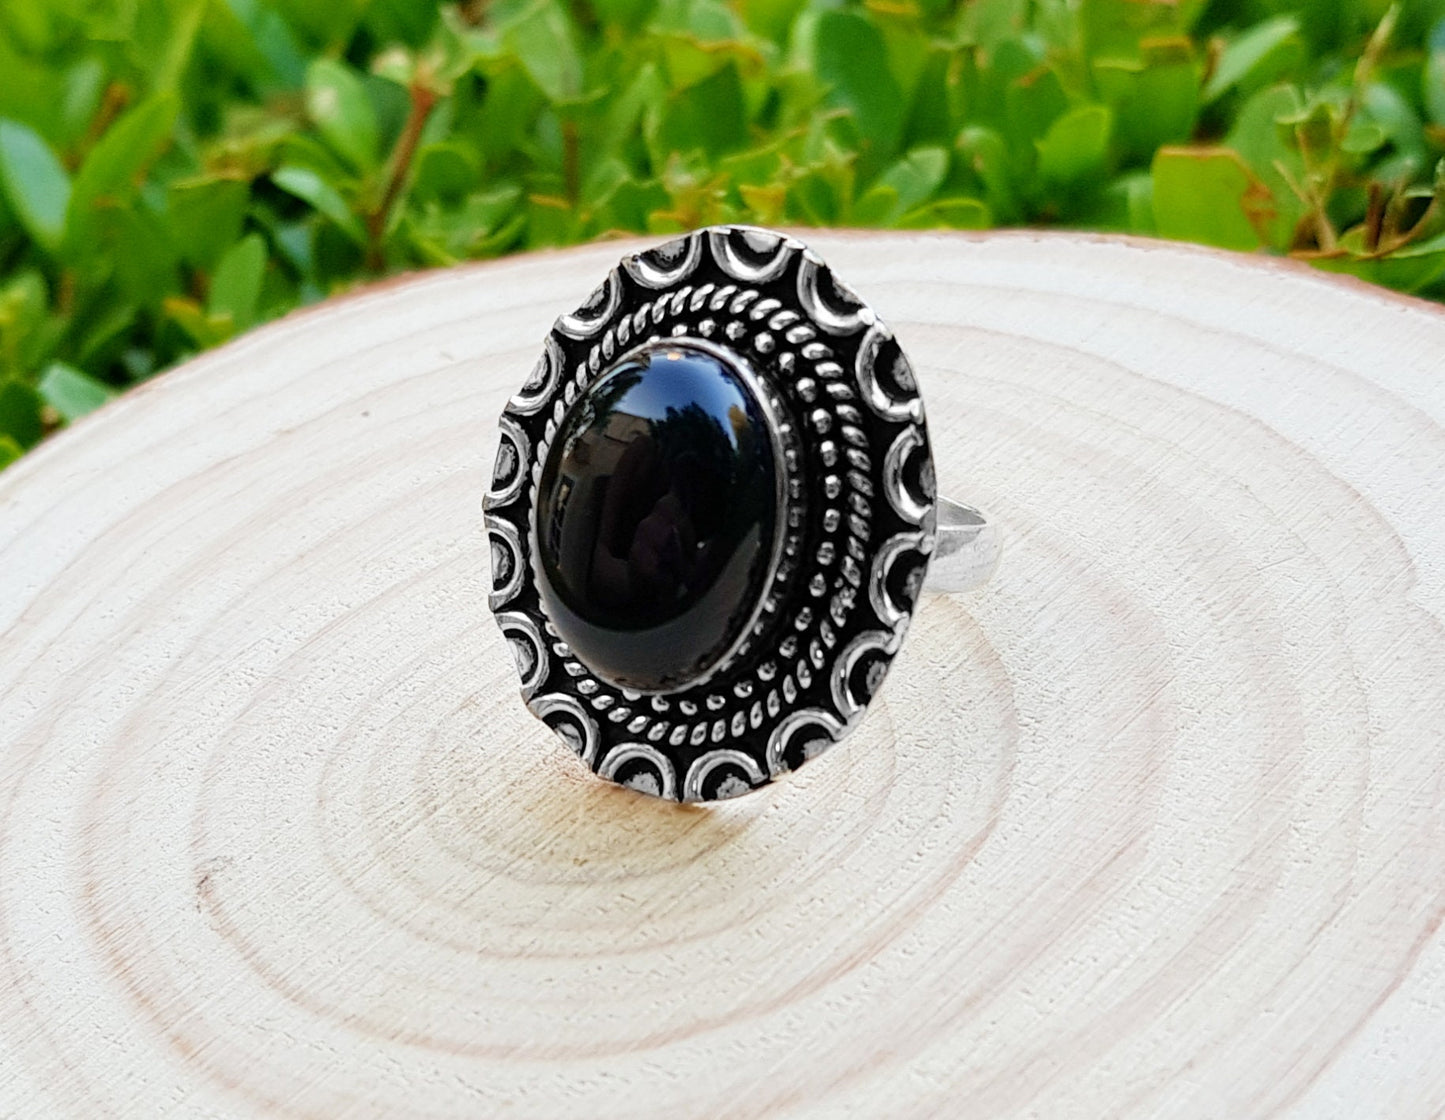 Black Onyx Ring In Sterling Silver Size US 8 1/2 Statement Ring Boho Crystal Ring GypsyJewelry Unique Gift